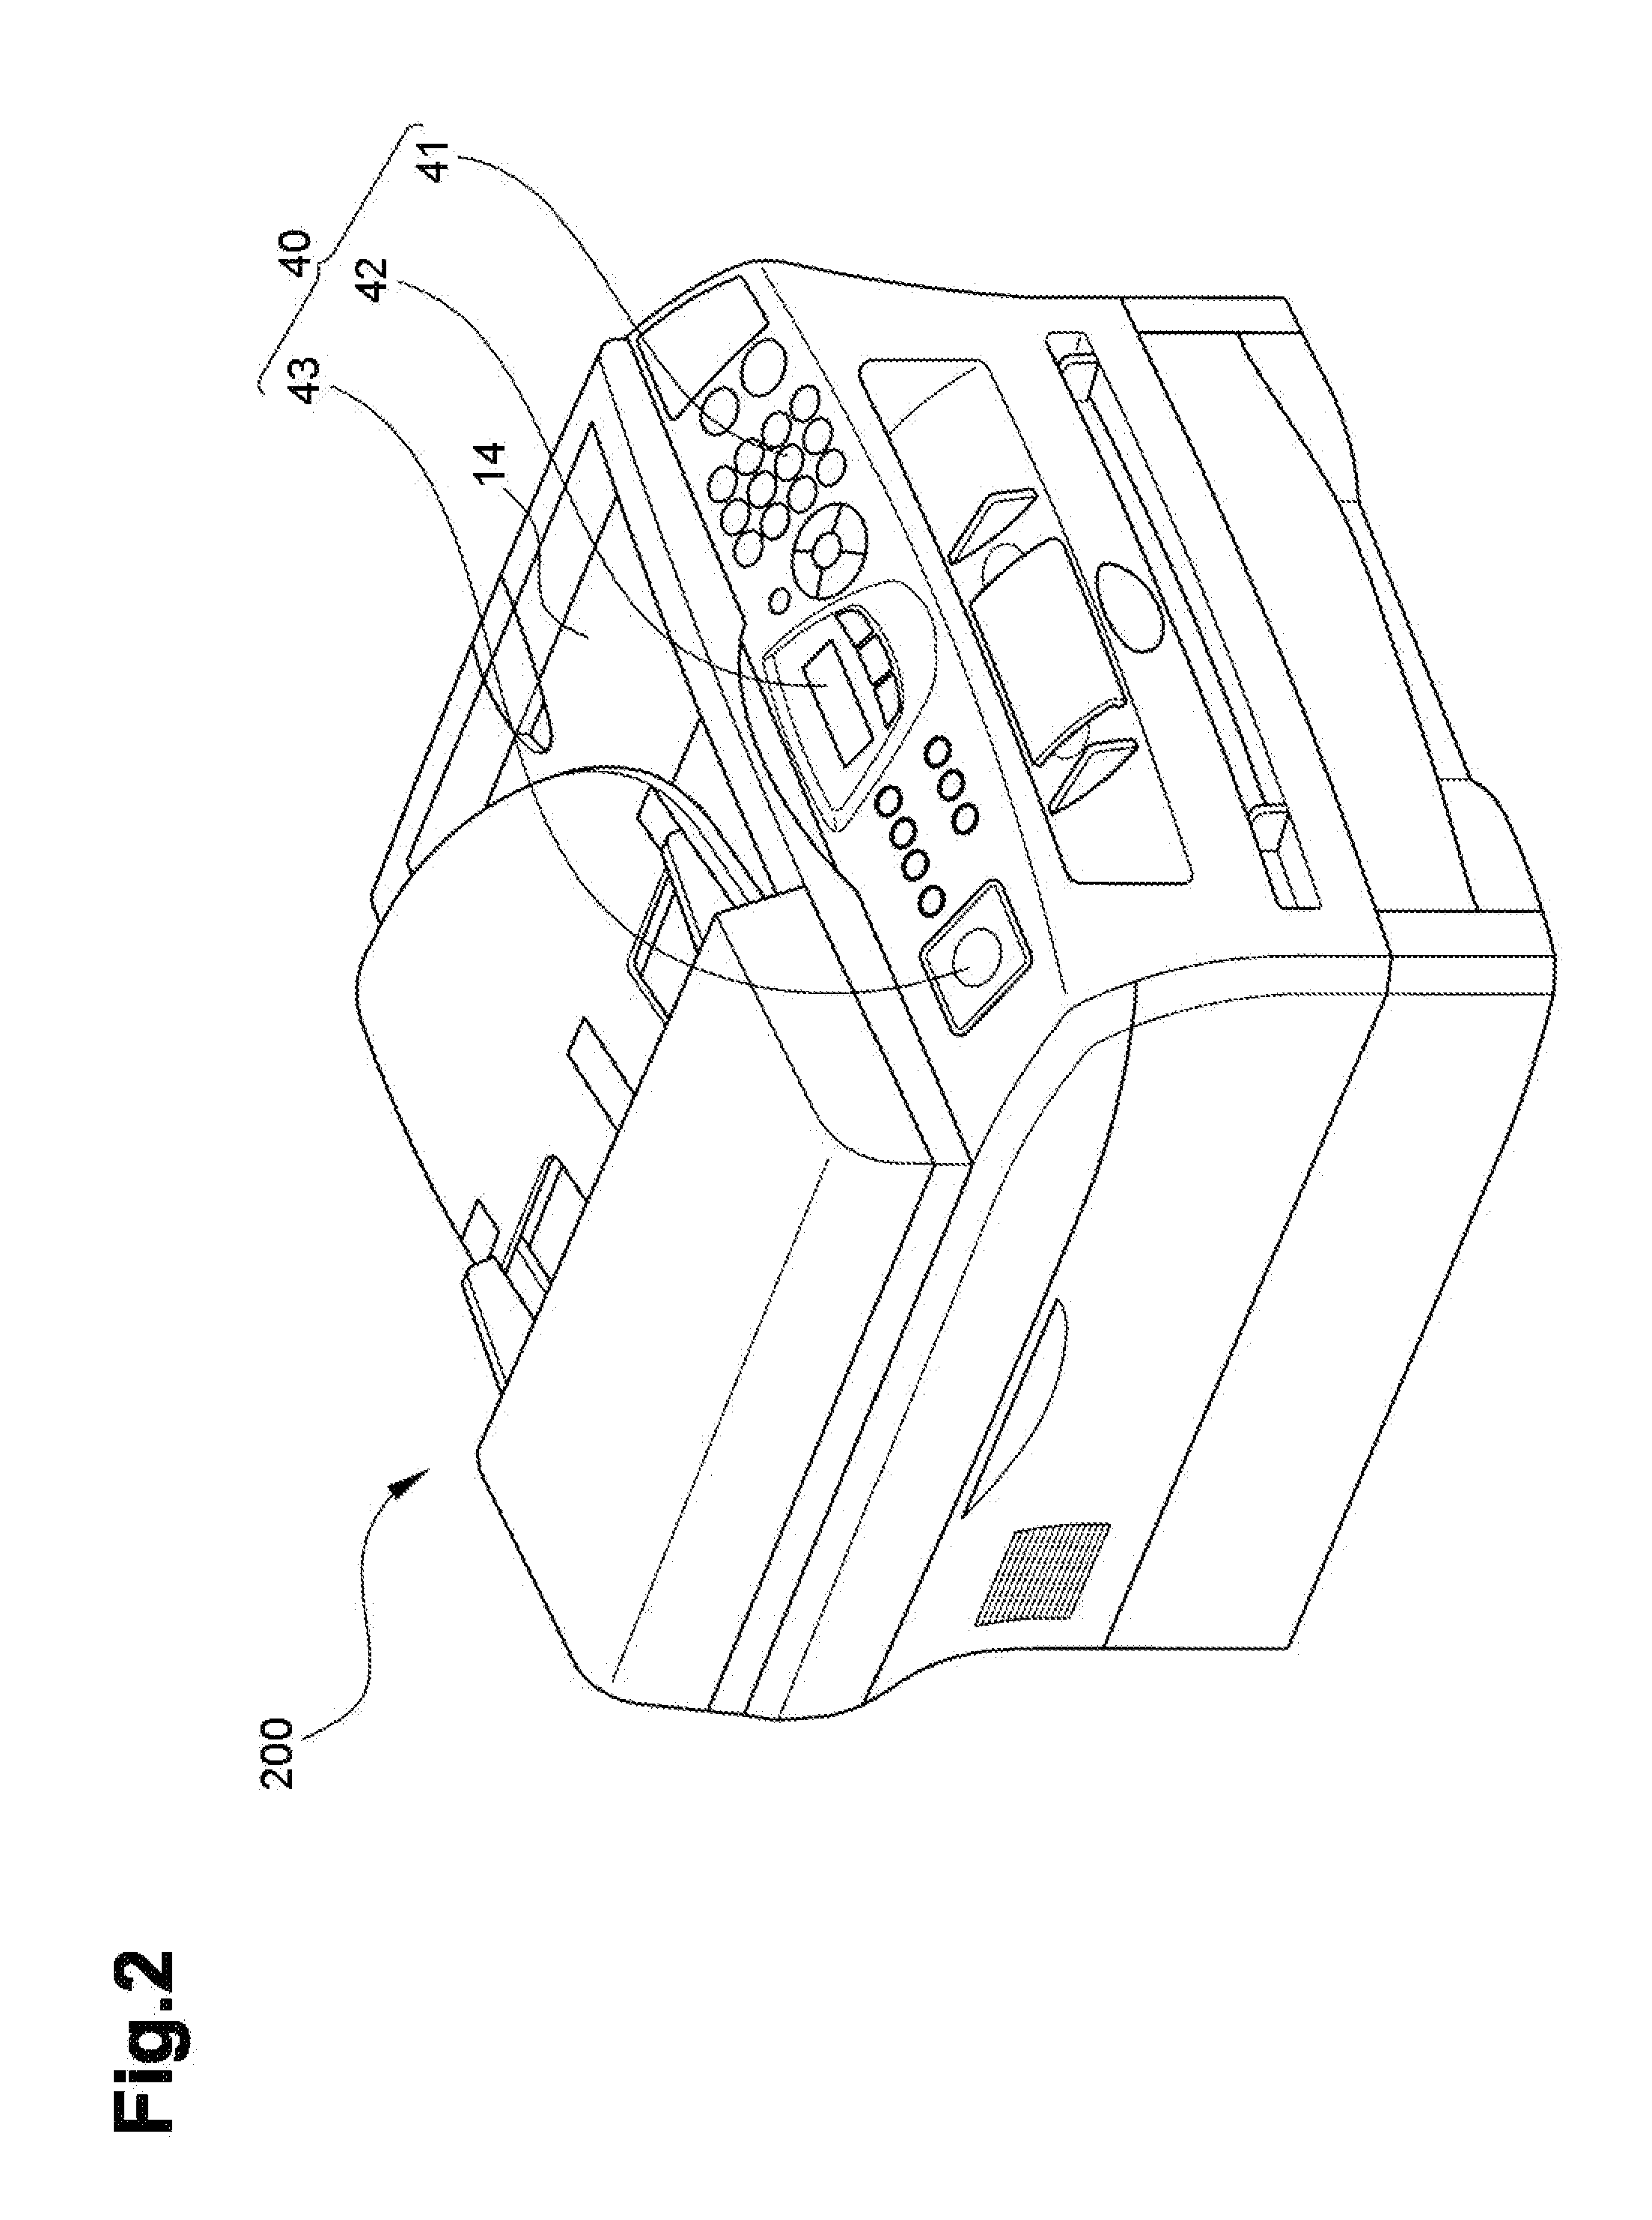 Image processing systems, data processing apparatuses, and computer-readable media storing instructions for data processing apparatuses